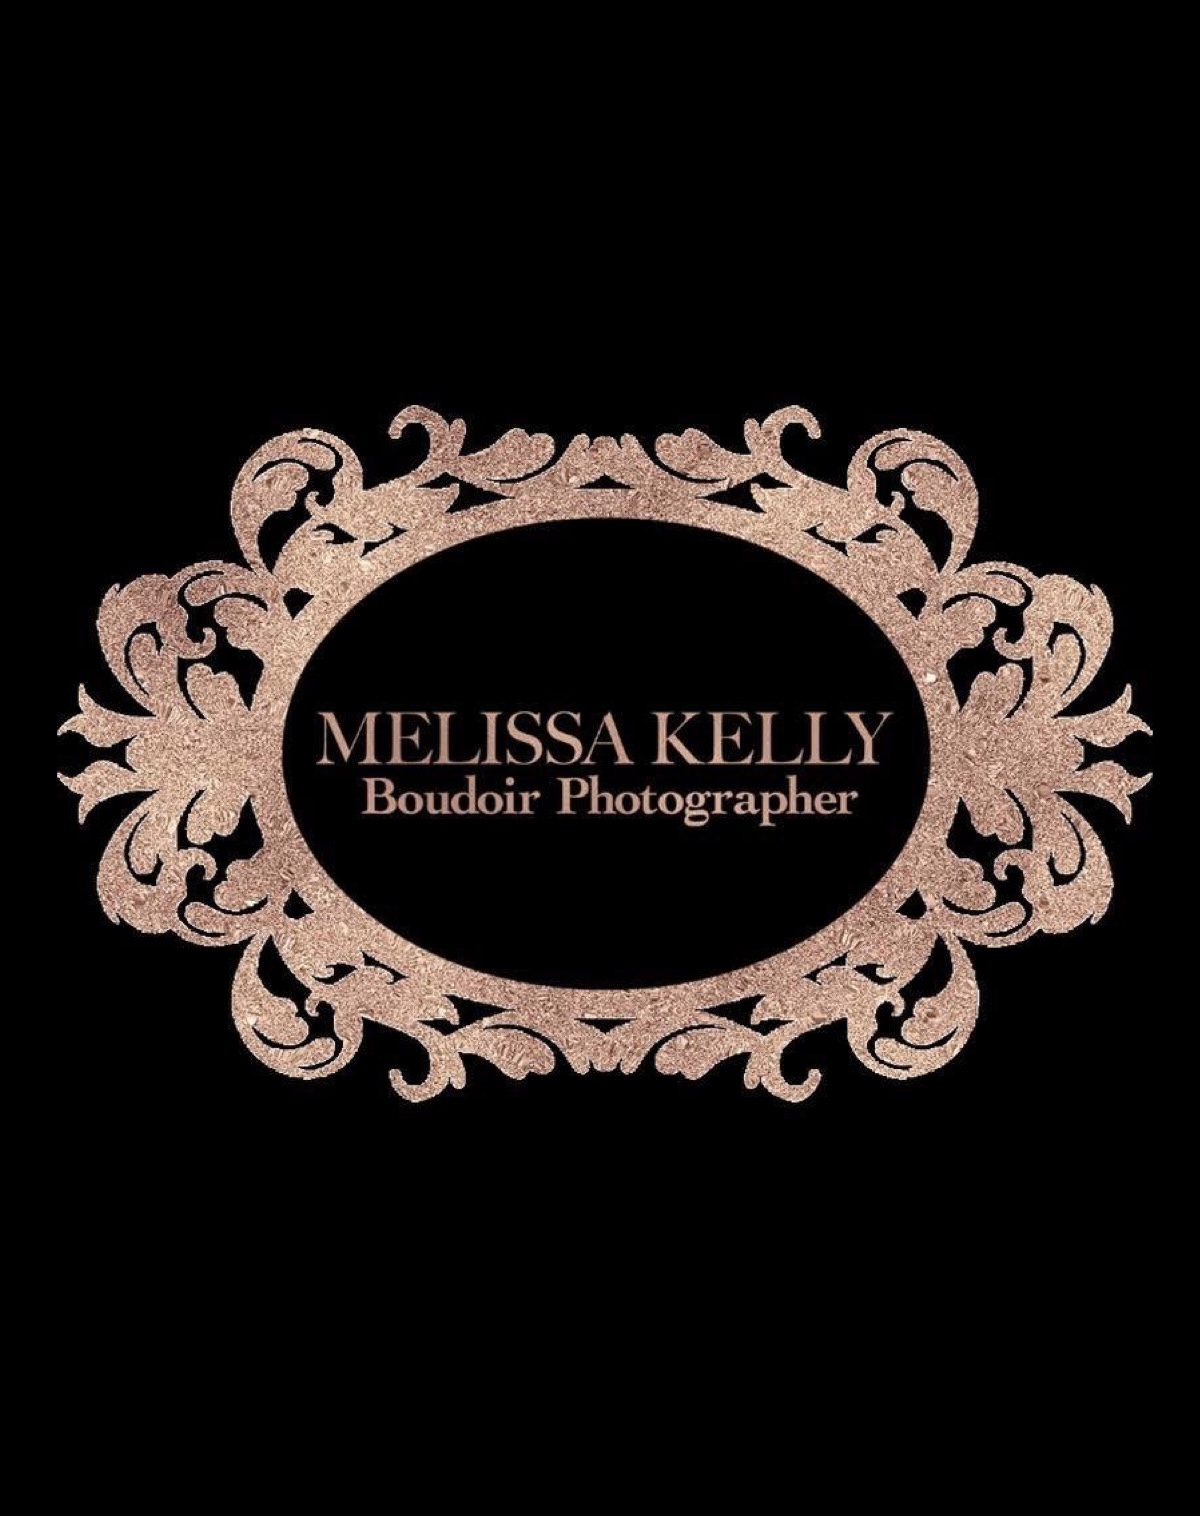 MelissaKellyPhotography